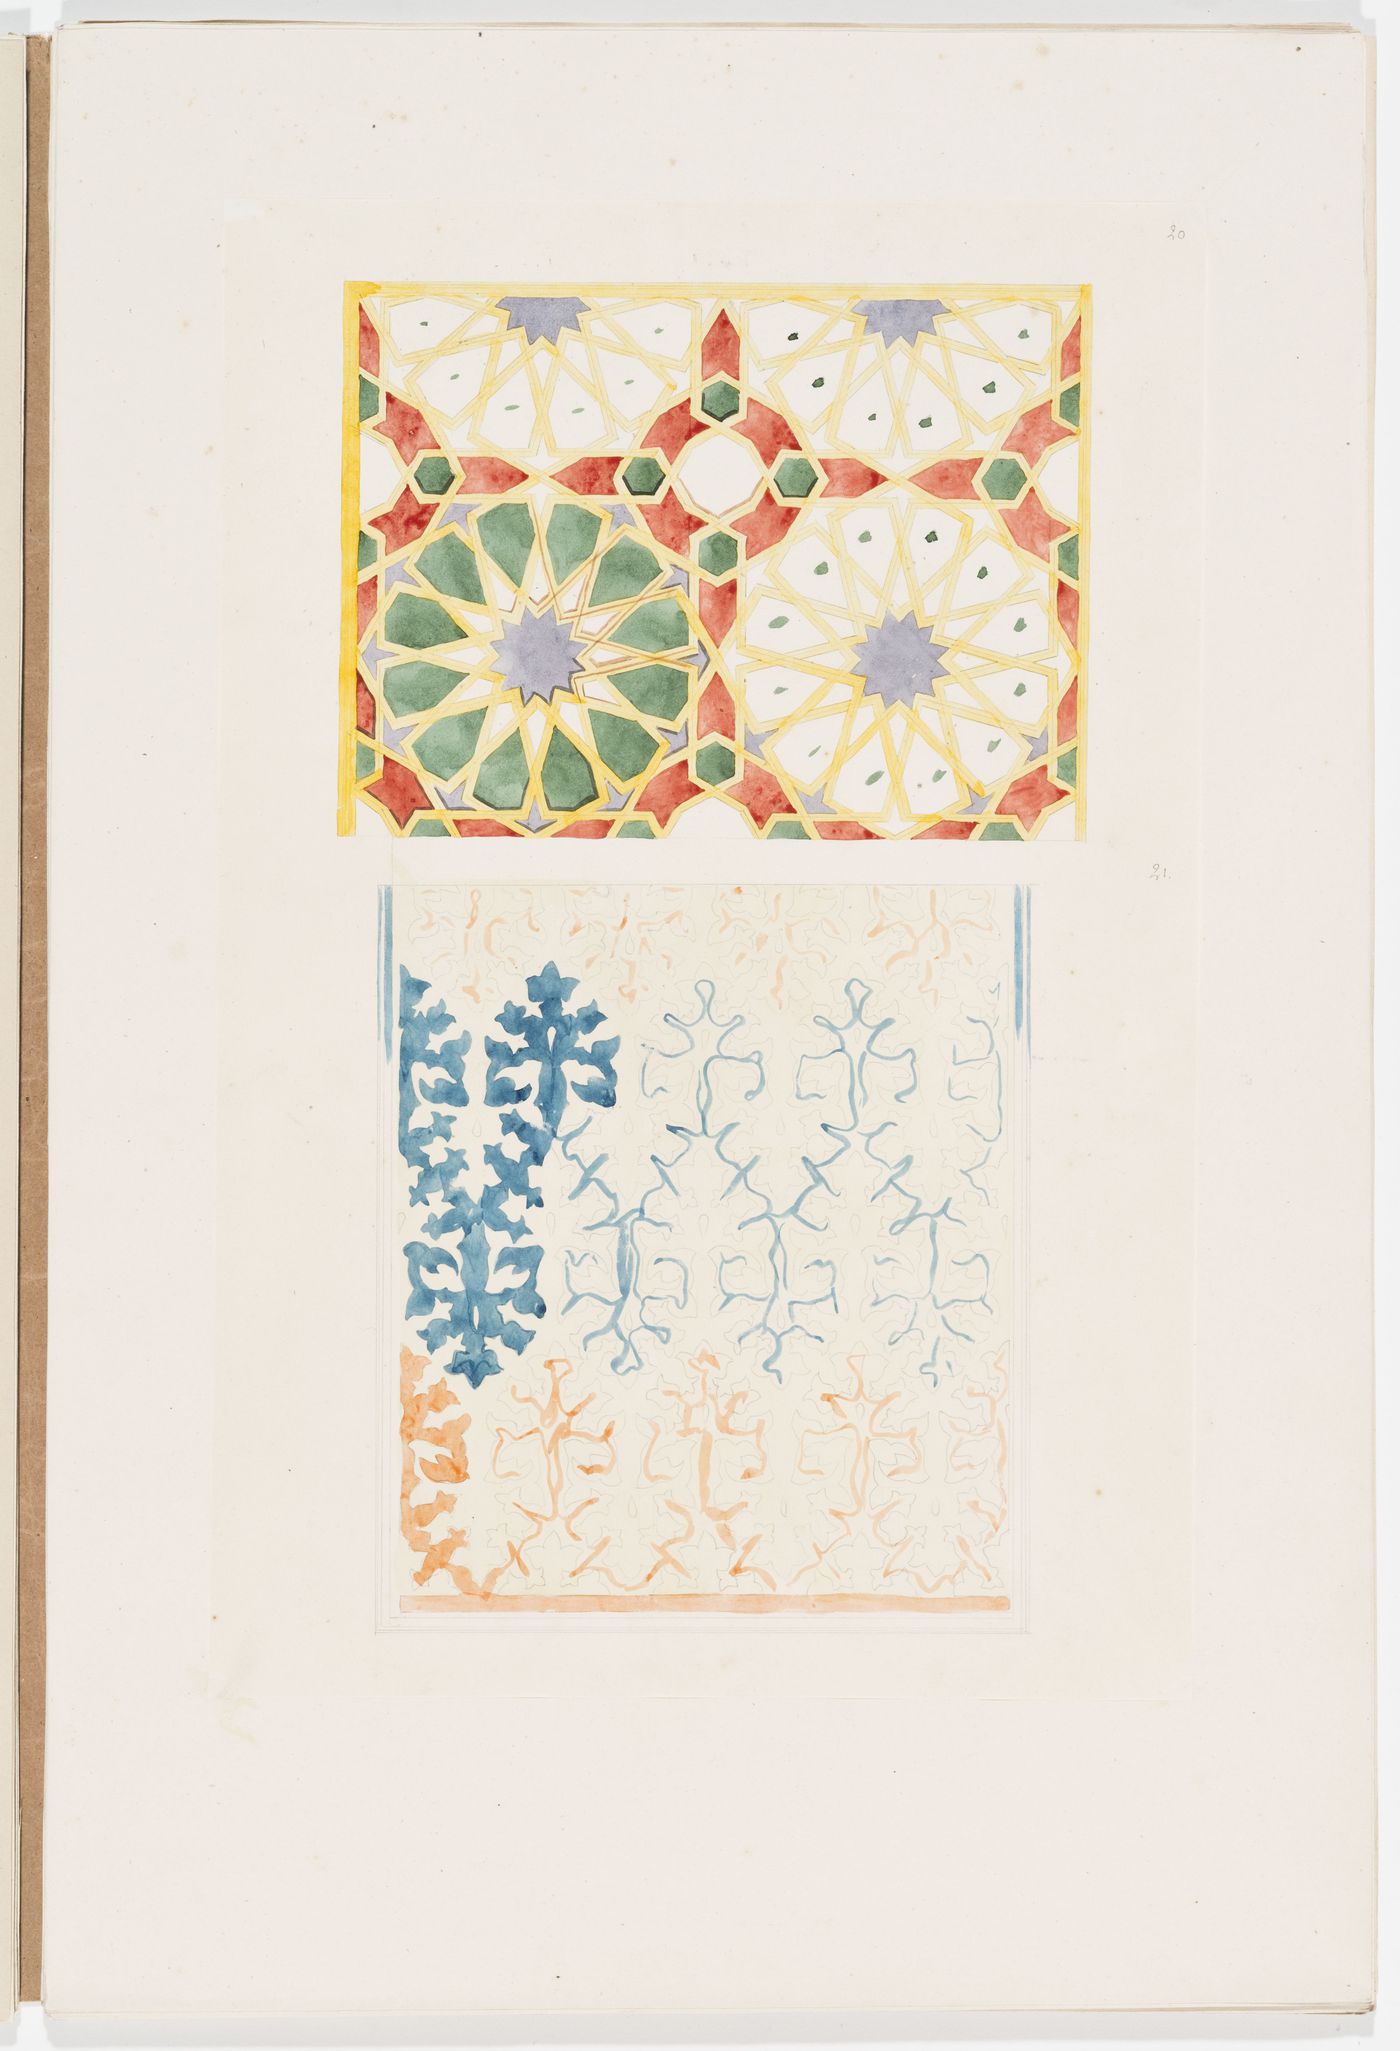 Ornament drawing of a panel decorated with geometric shapes and interlacing lines, probably Islamic, and a panel decorated with foliage